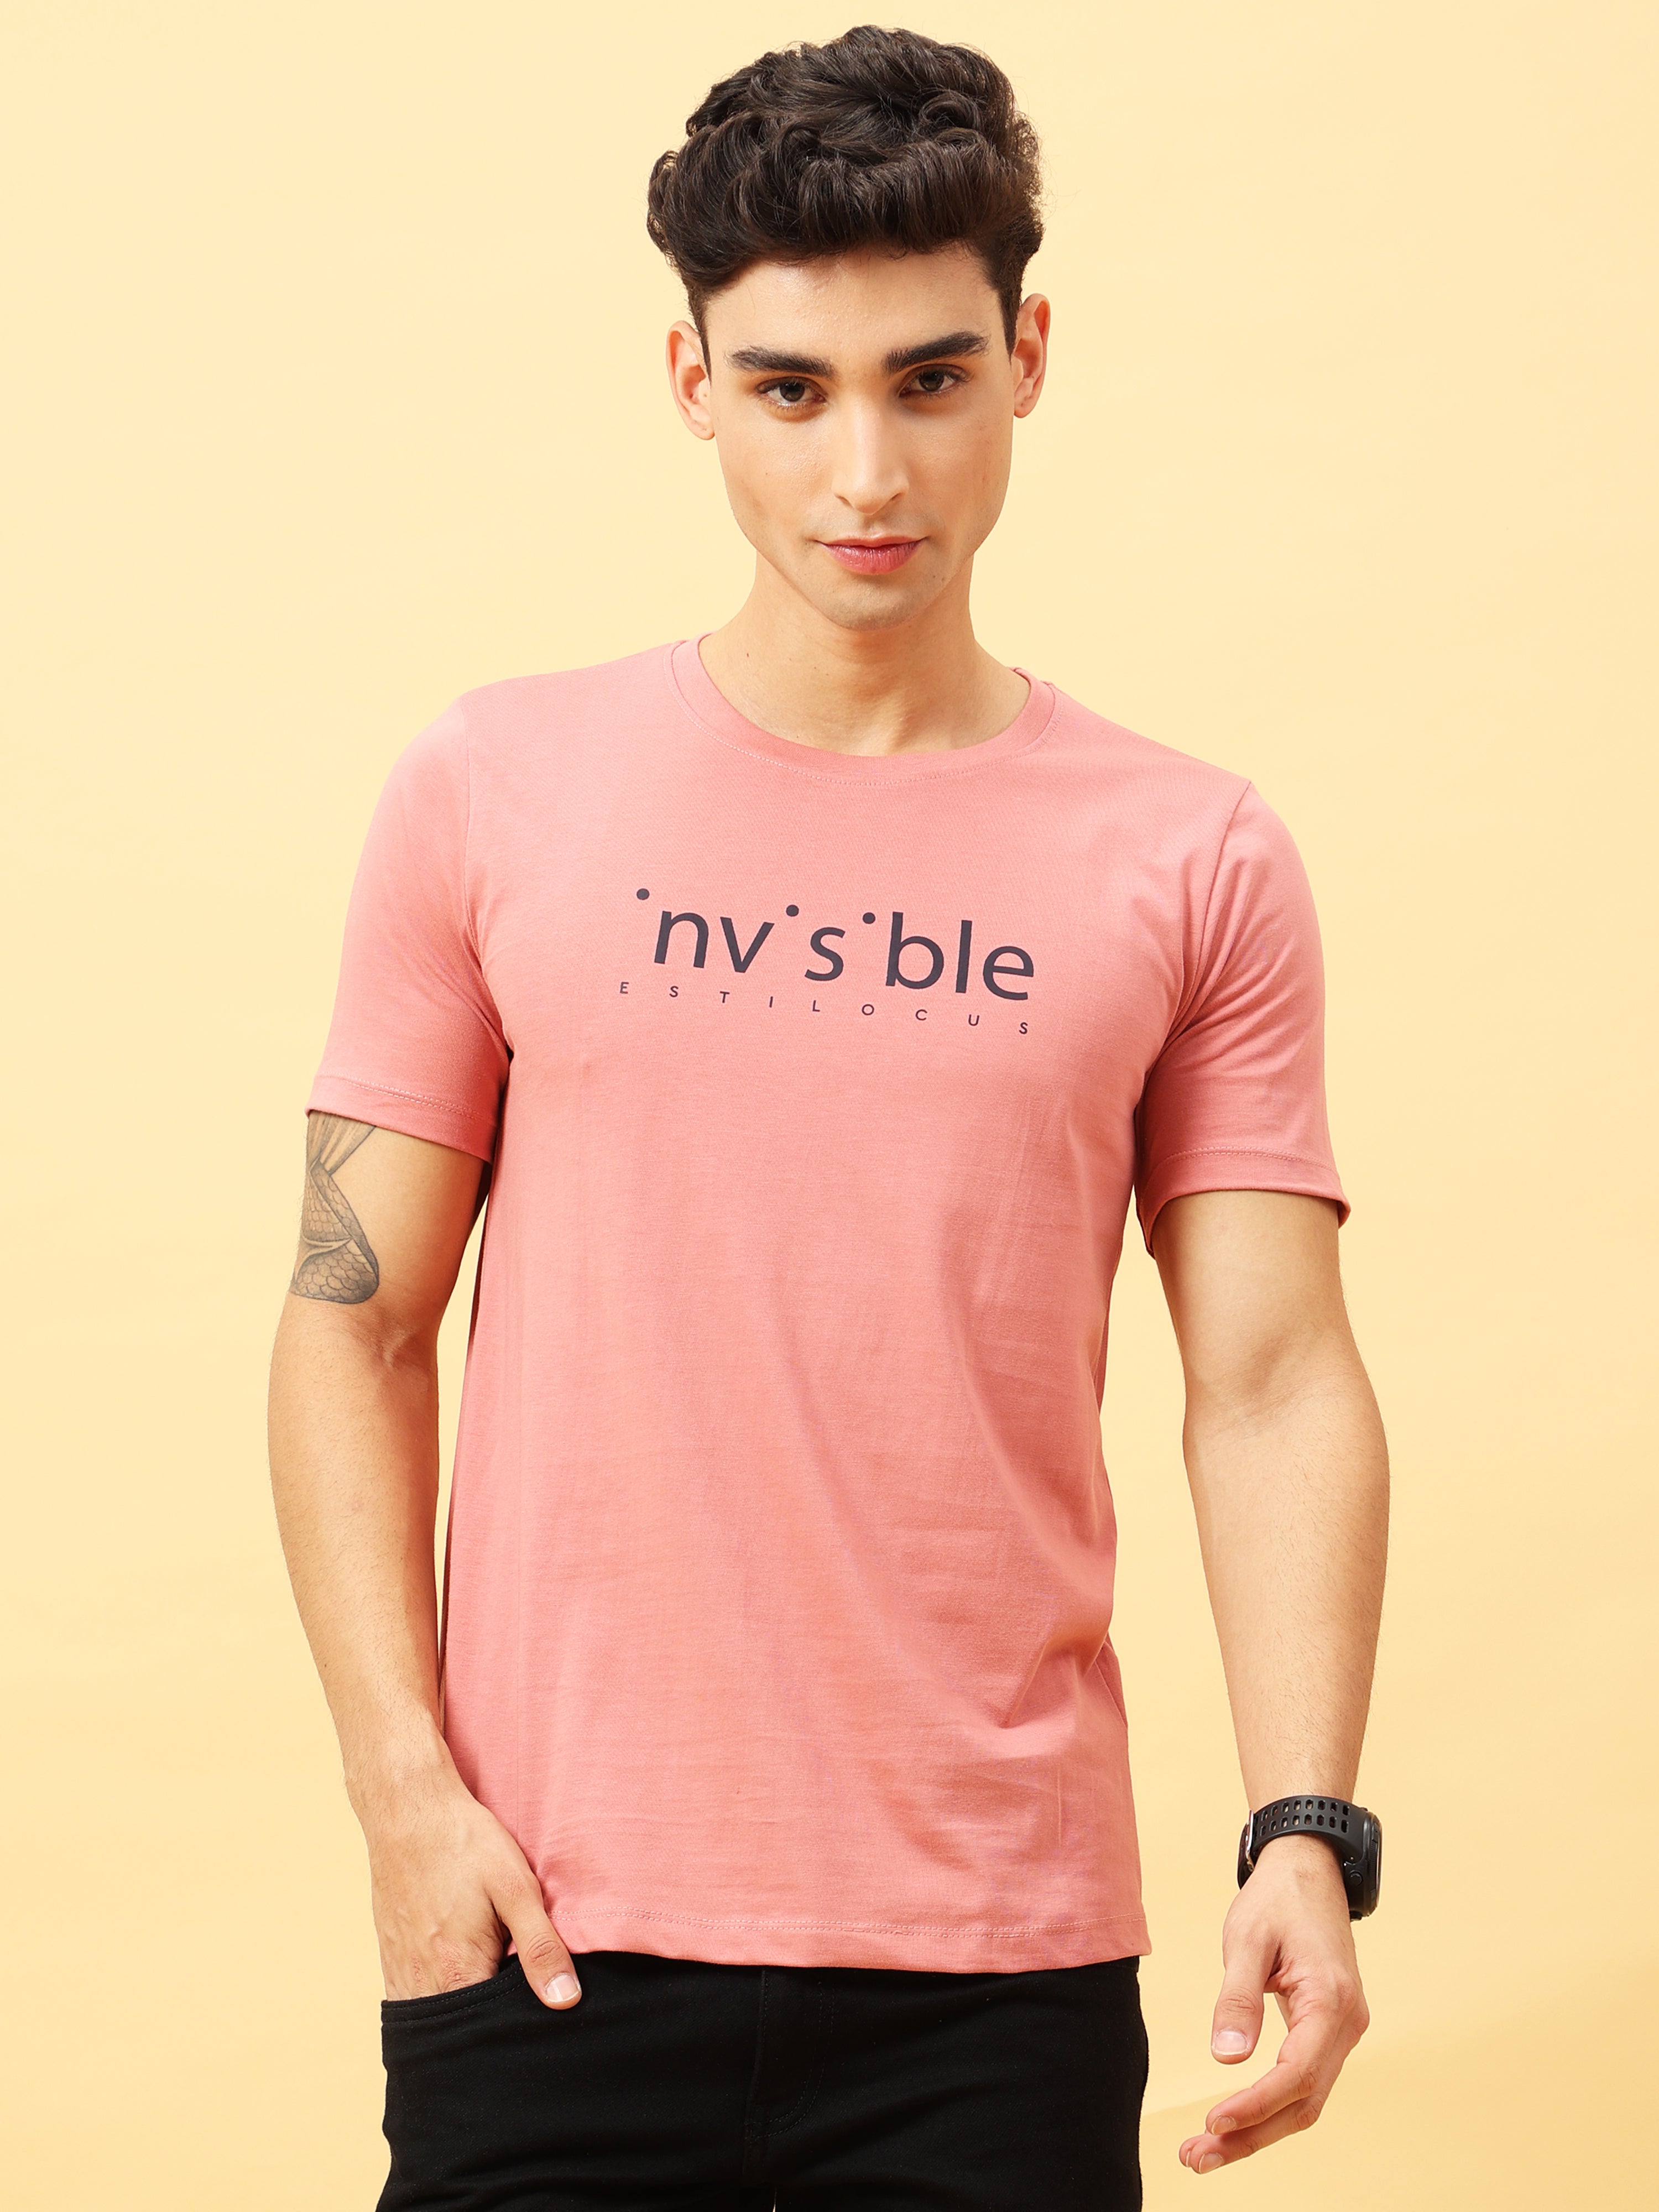 Invisible Coral T-shirt shop online at Estilocus. This pure cotton printed T-shirt is a stylish go-to for laidback days. Cut in a comfy regular fit. • 100% Cotton knitted interlock 190GSM• Bio washed fabric• Round neck T-shirt • Half sleeve • Suits to wea